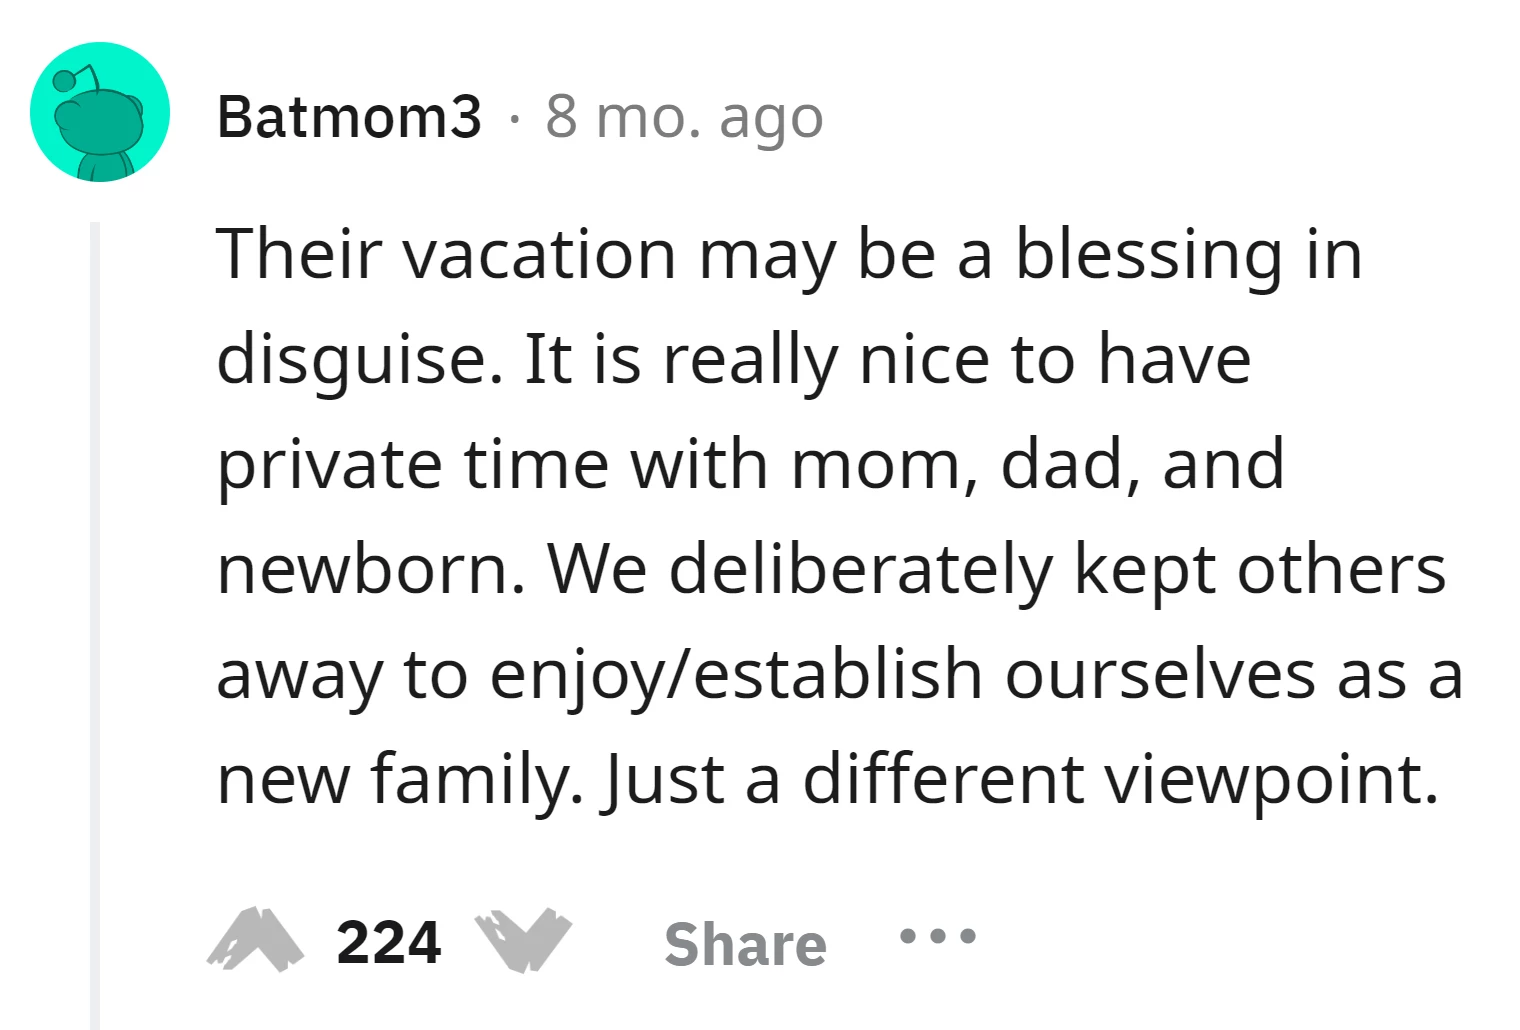 You can have private time with your parents and newborn